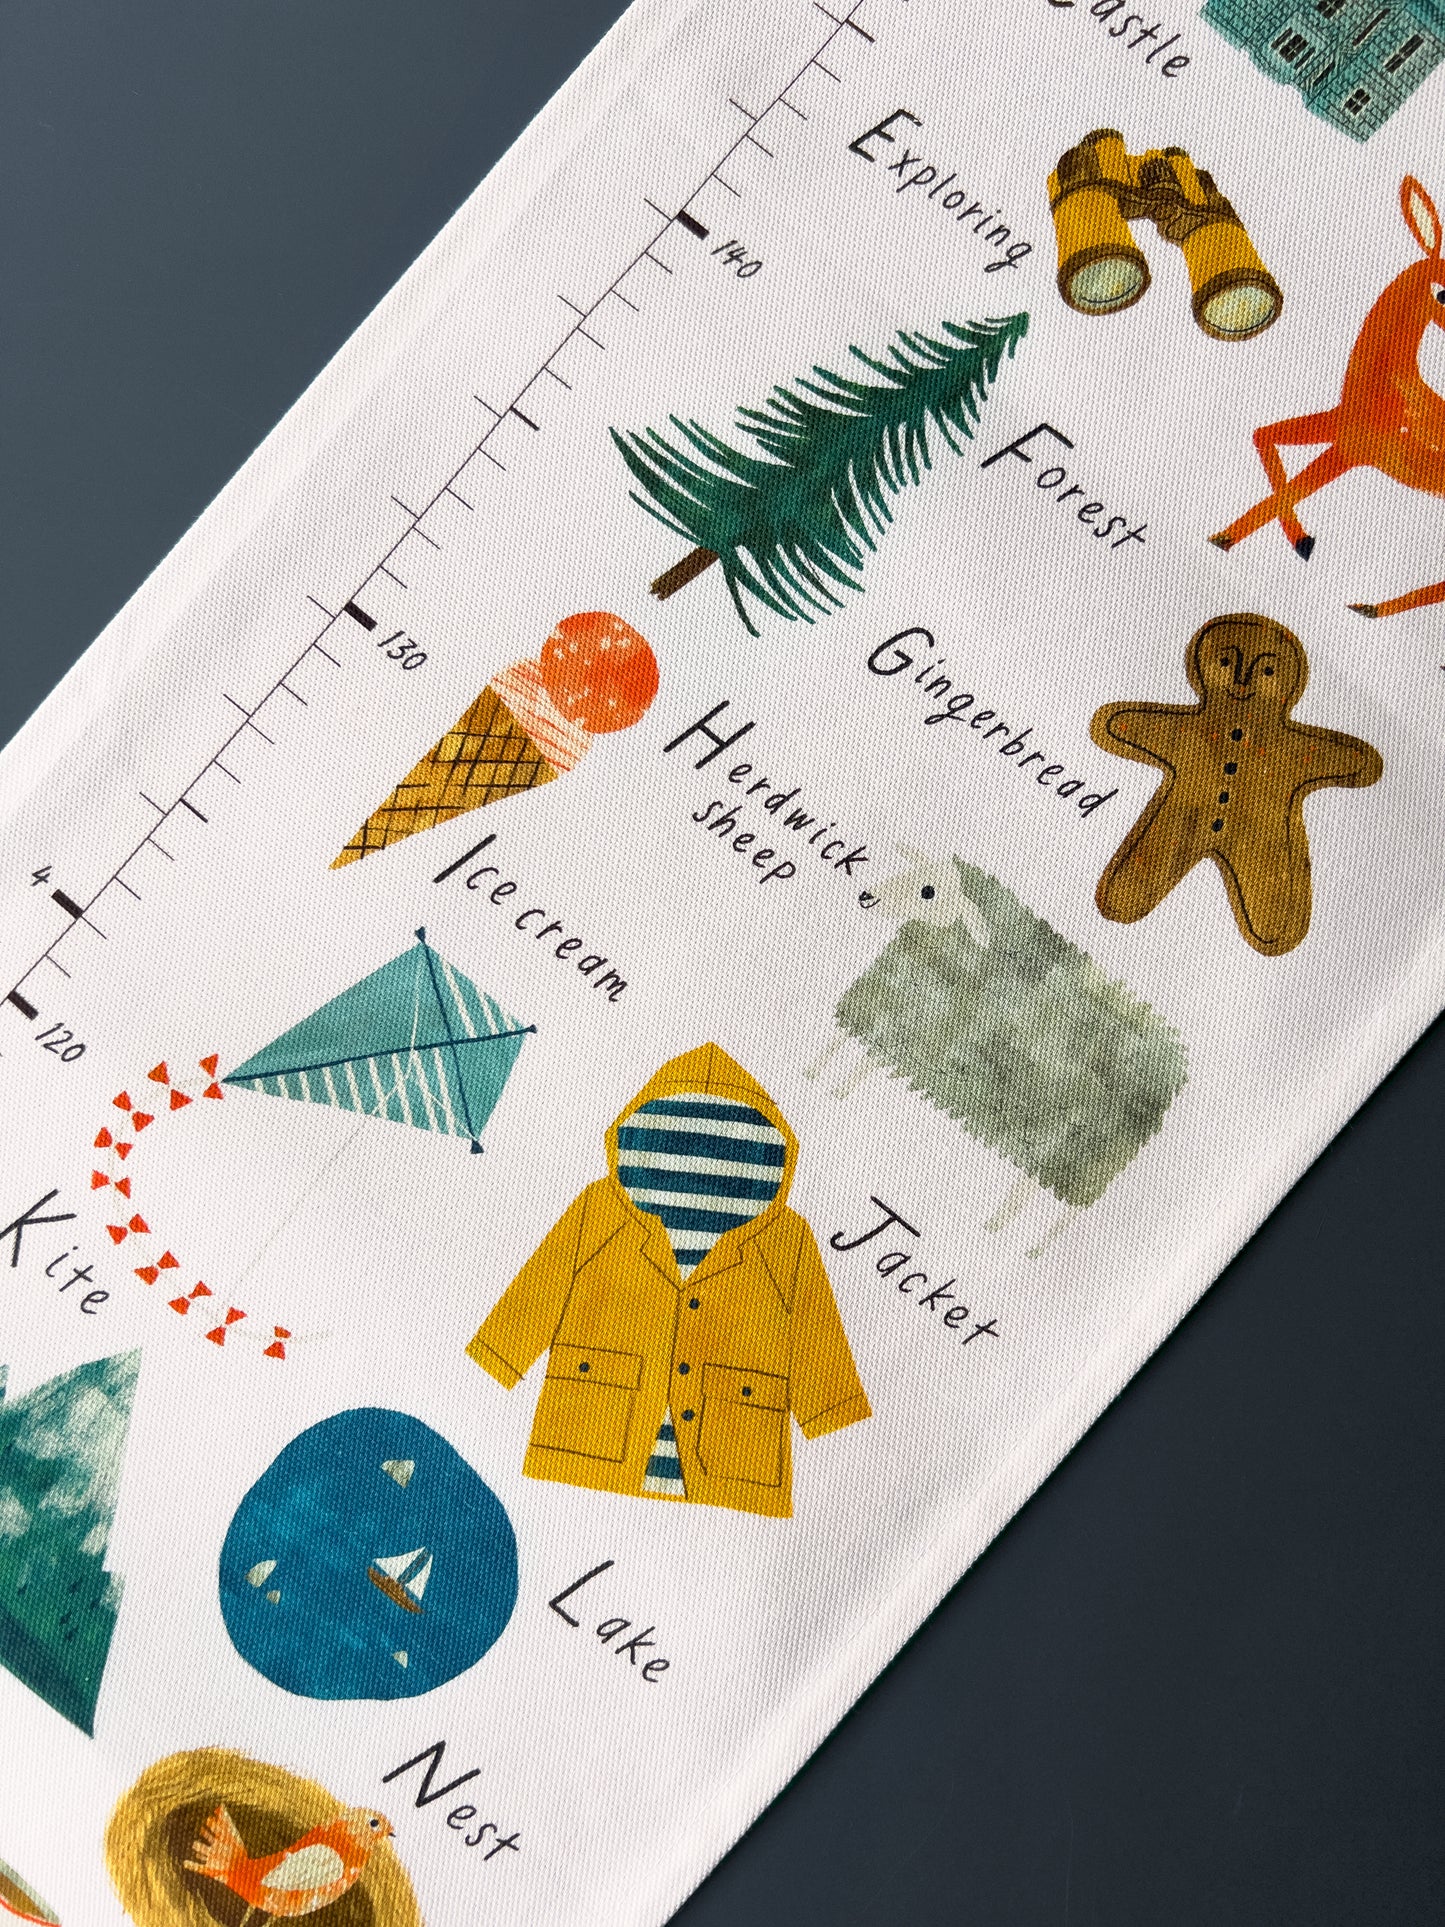 Lake District A-Z Children's Fabric Height Chart